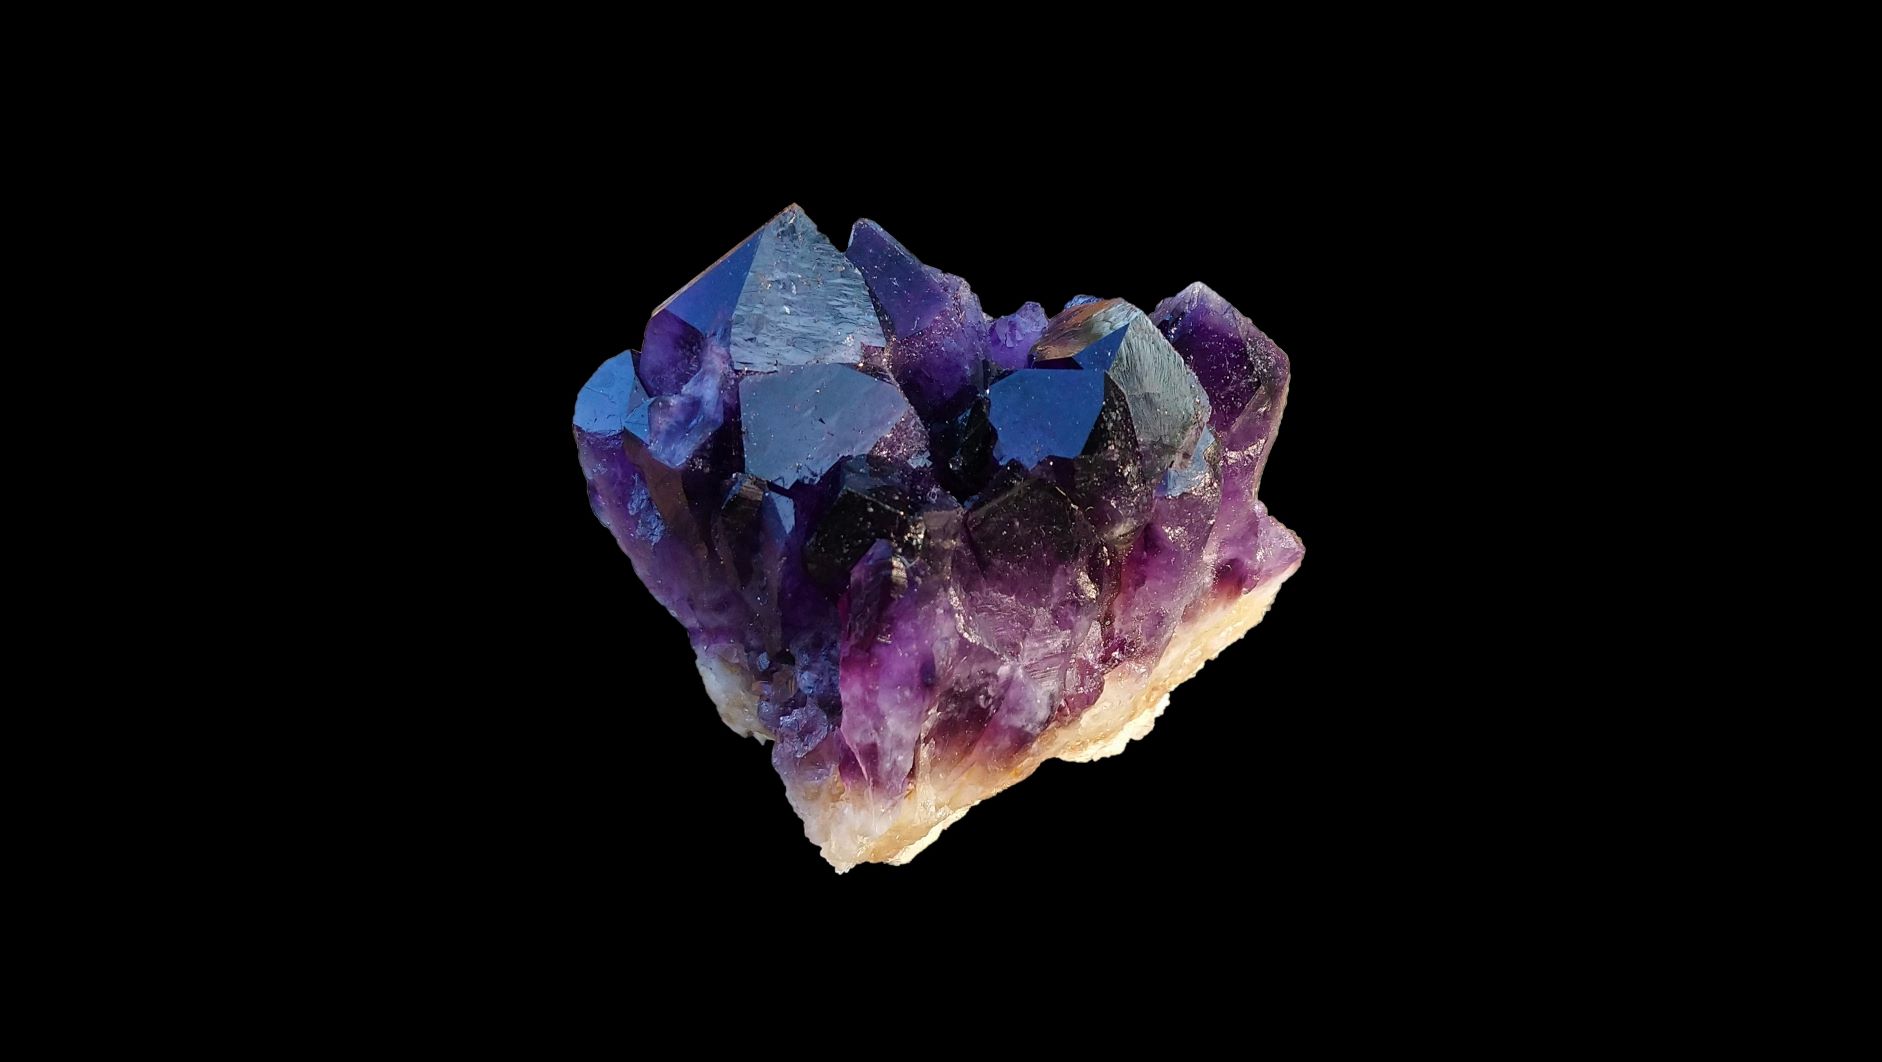 Amethyst with pseudo-cubic crystals.